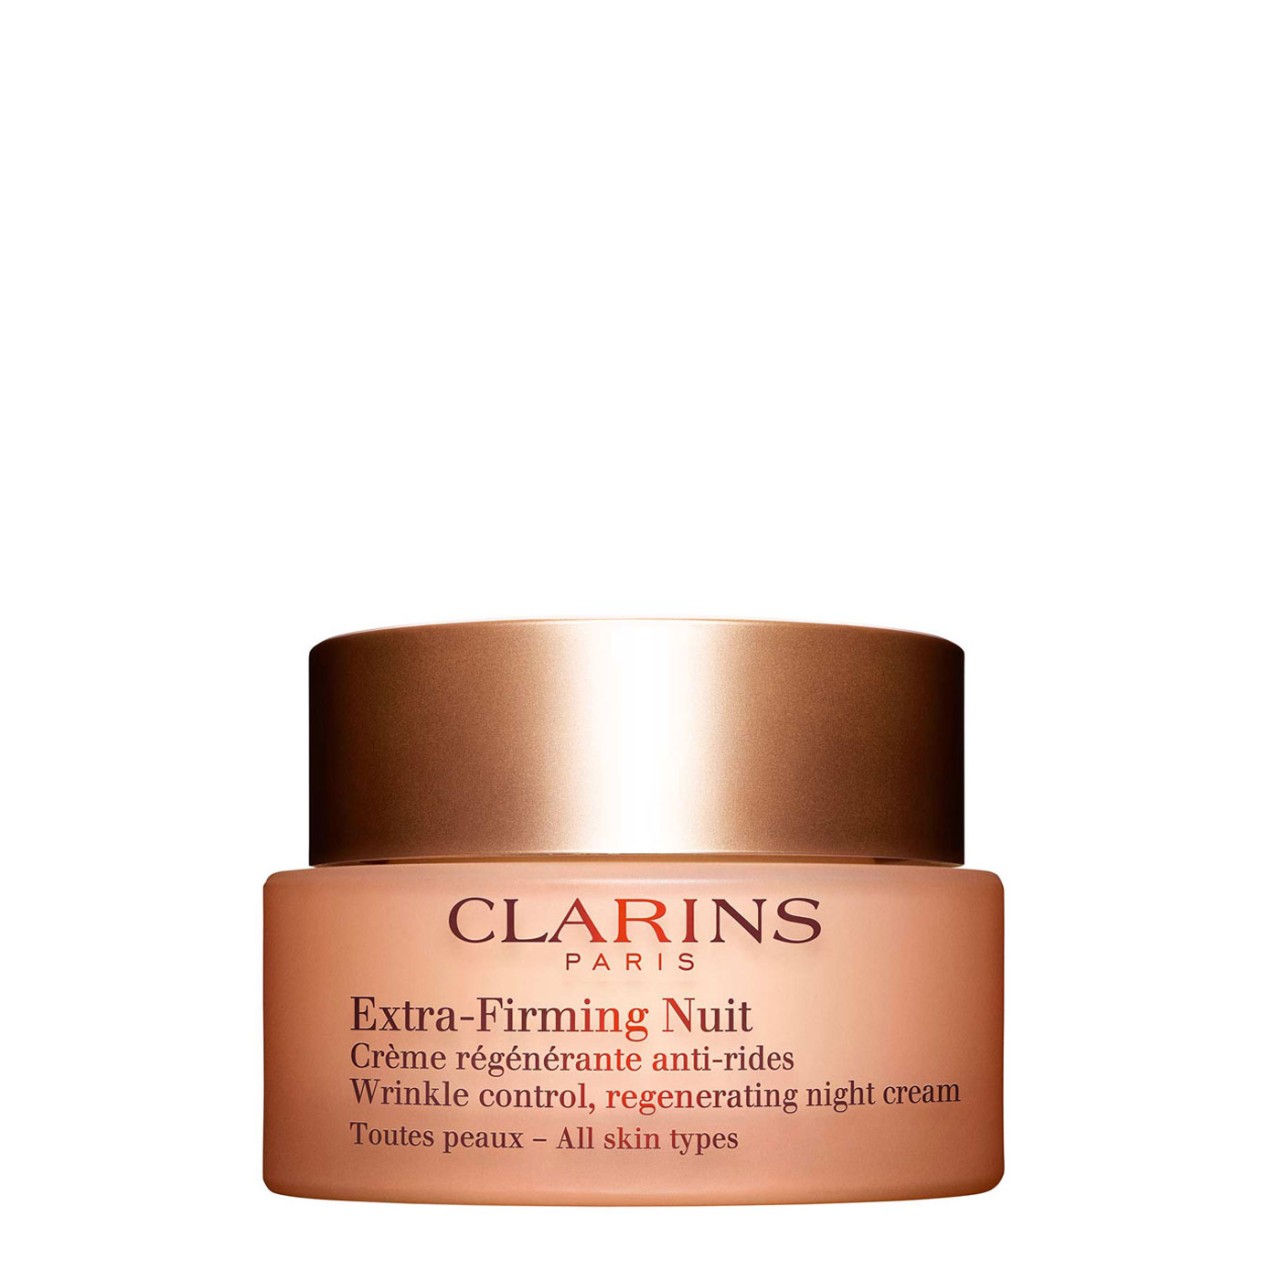 Clarins - Extra-Firming Creme Nuit TP - 